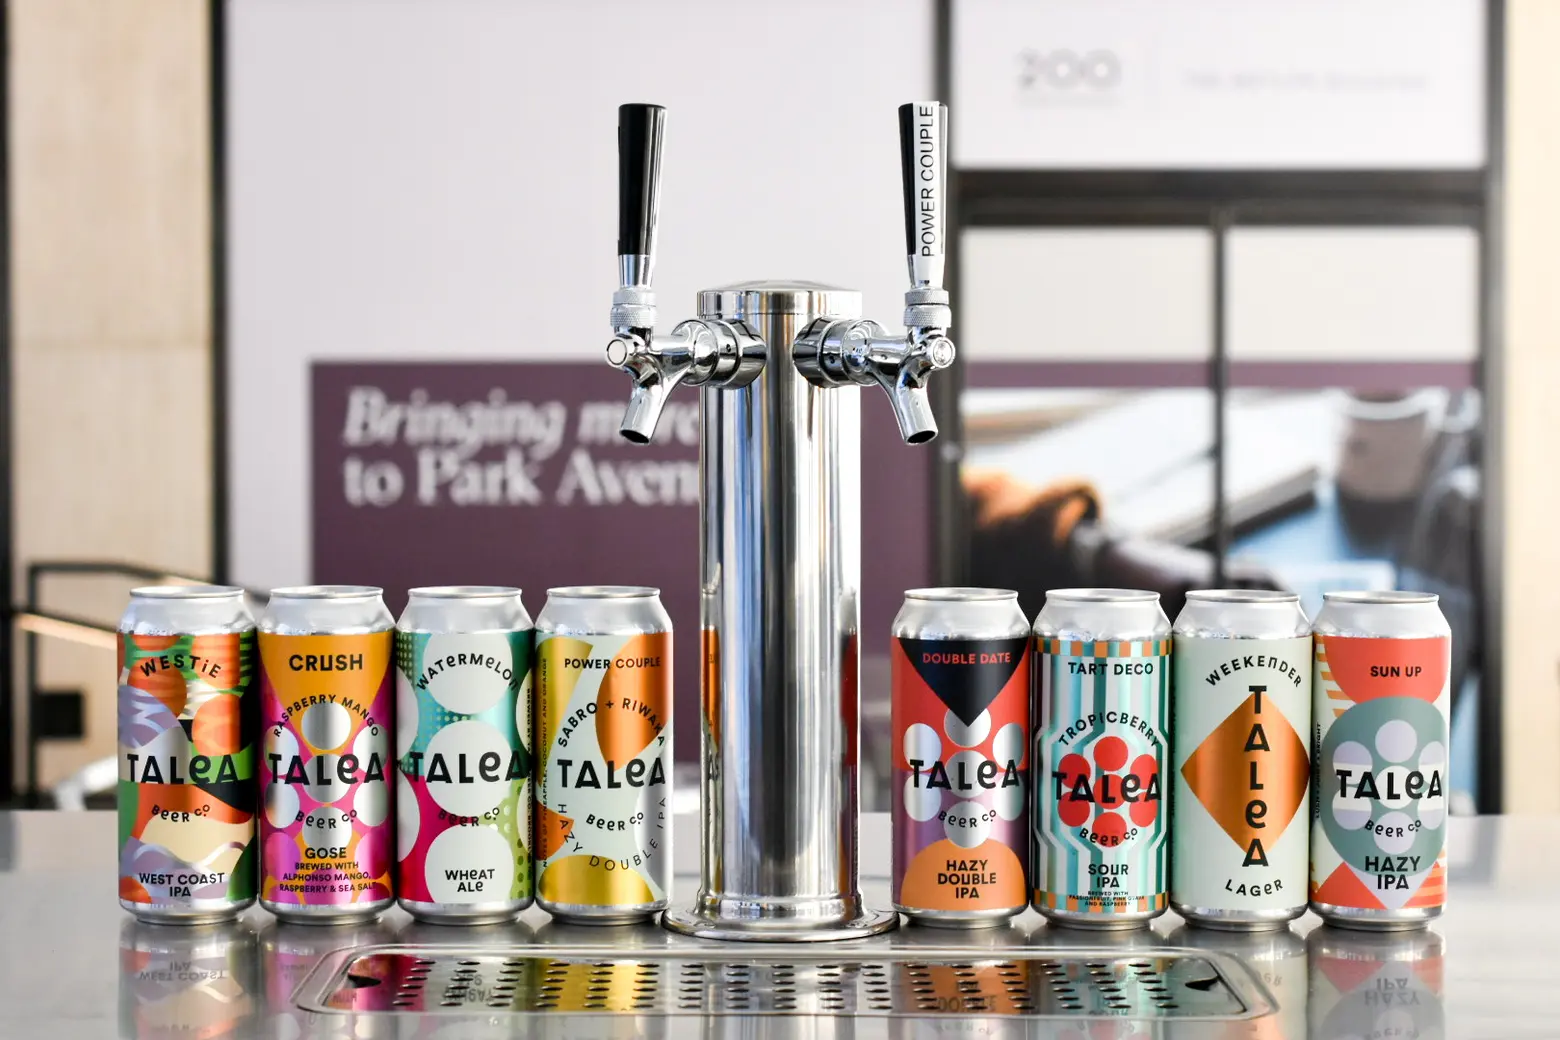 Talea Beer Co. opens outdoor pop-up brewery next to Grand Central